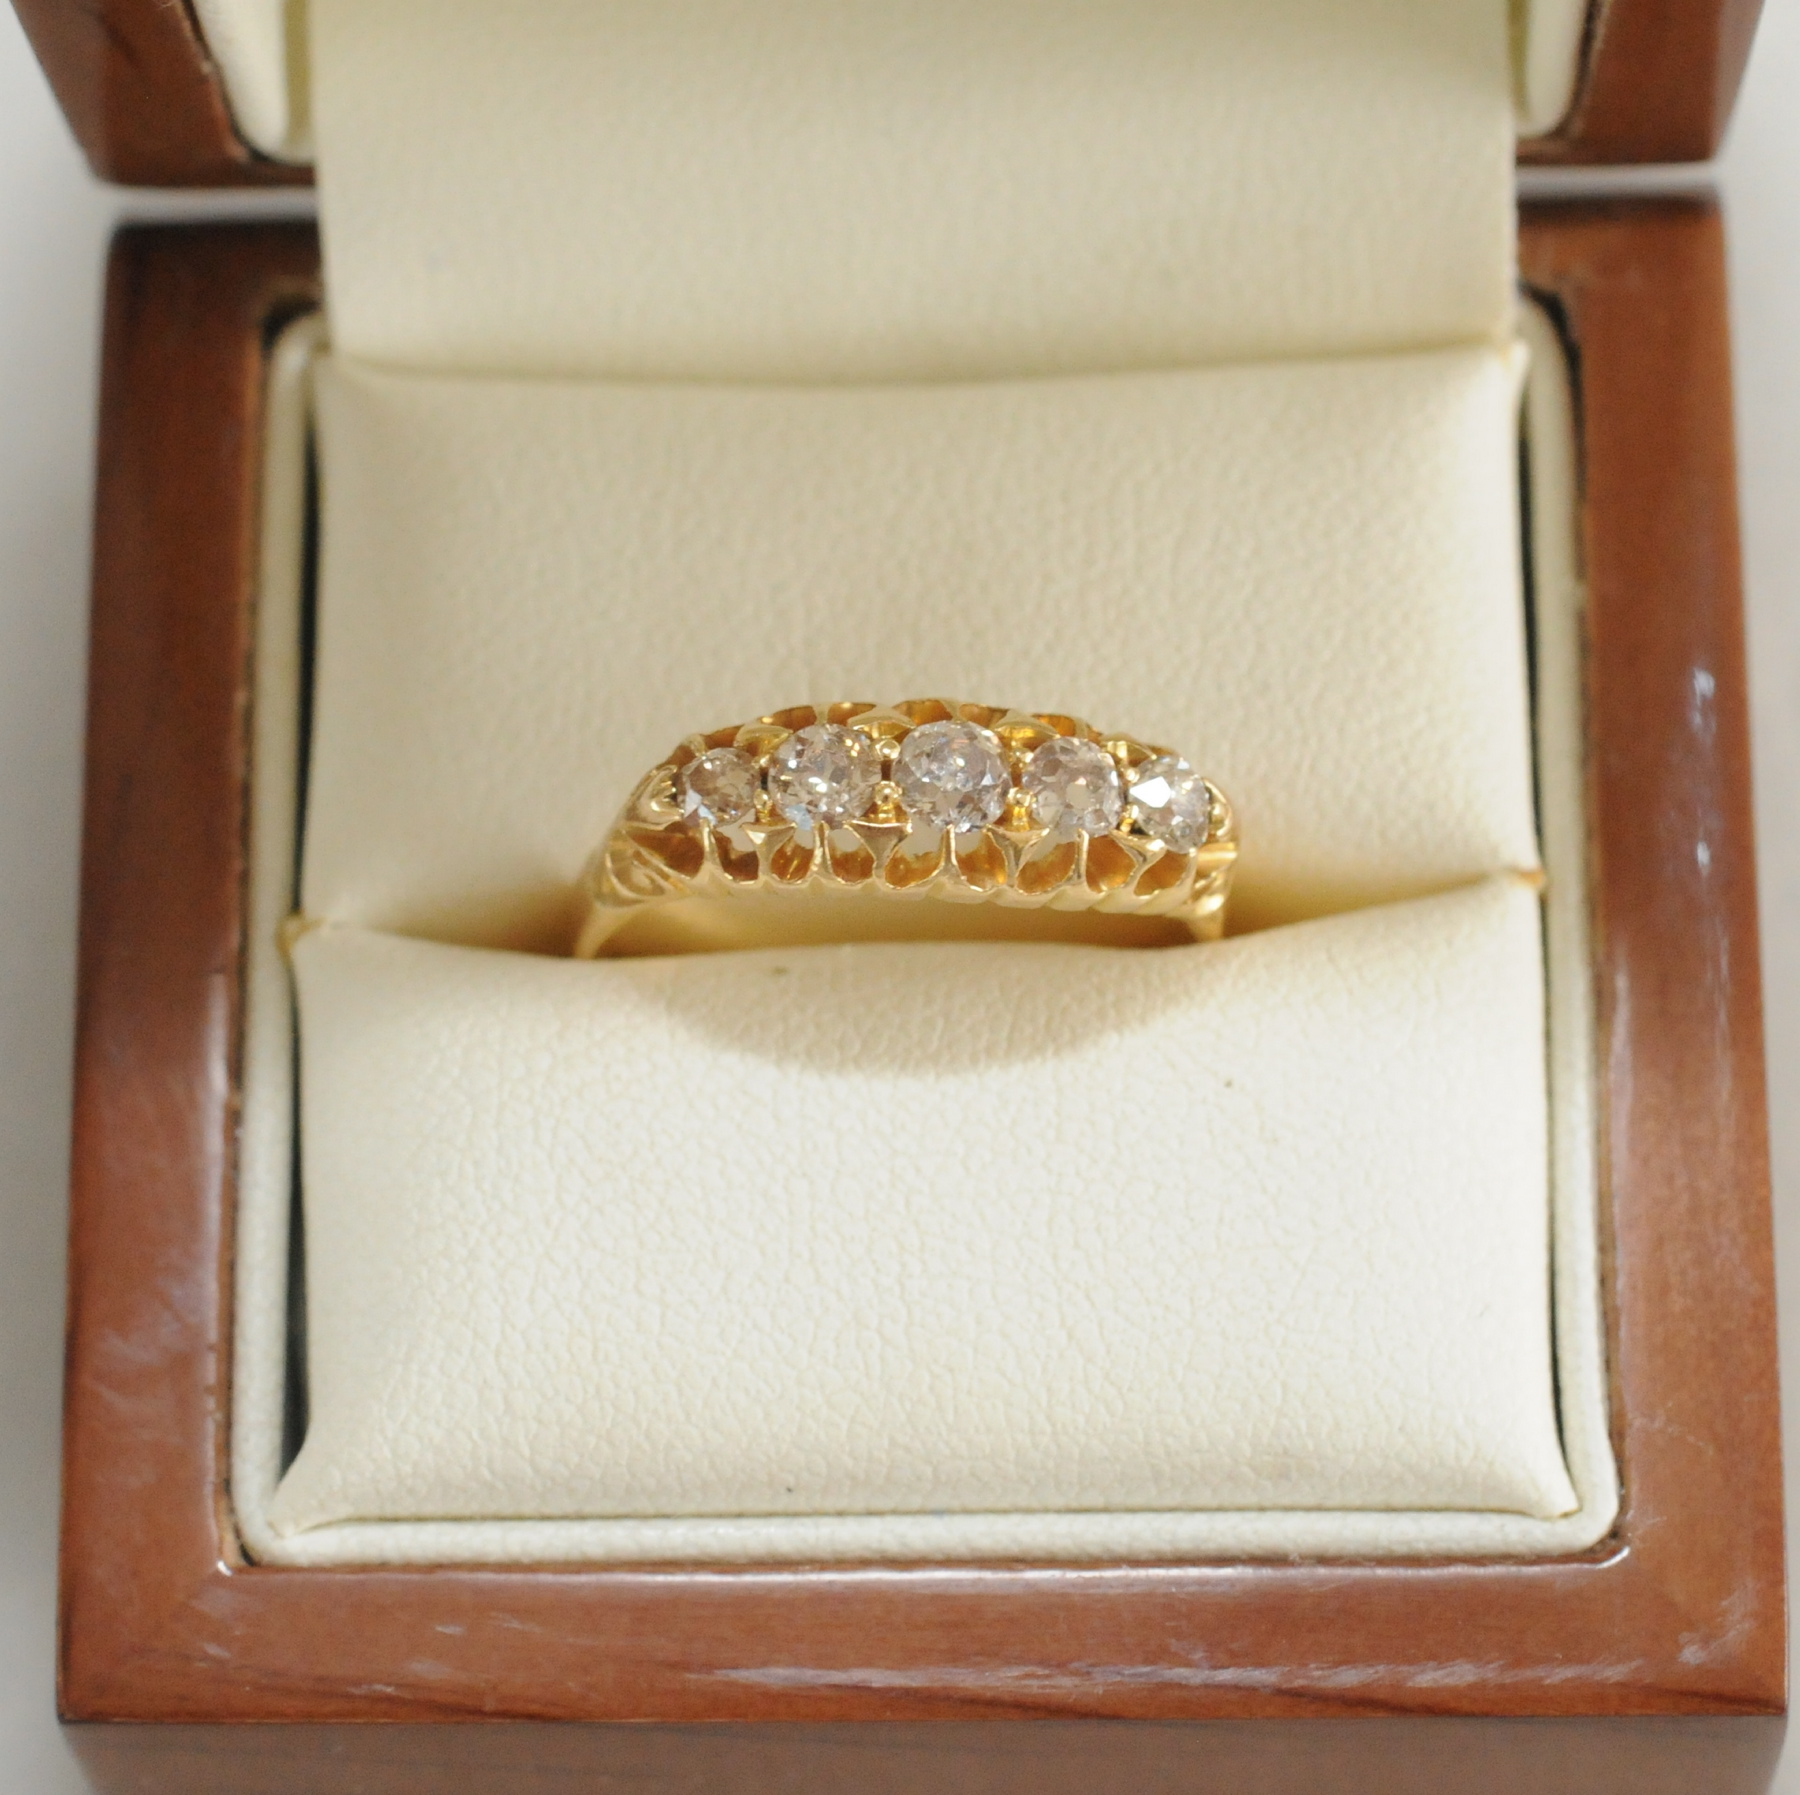 Edwardian five stone diamond ring with old cut brilliants, in 18ct gold, 1903.